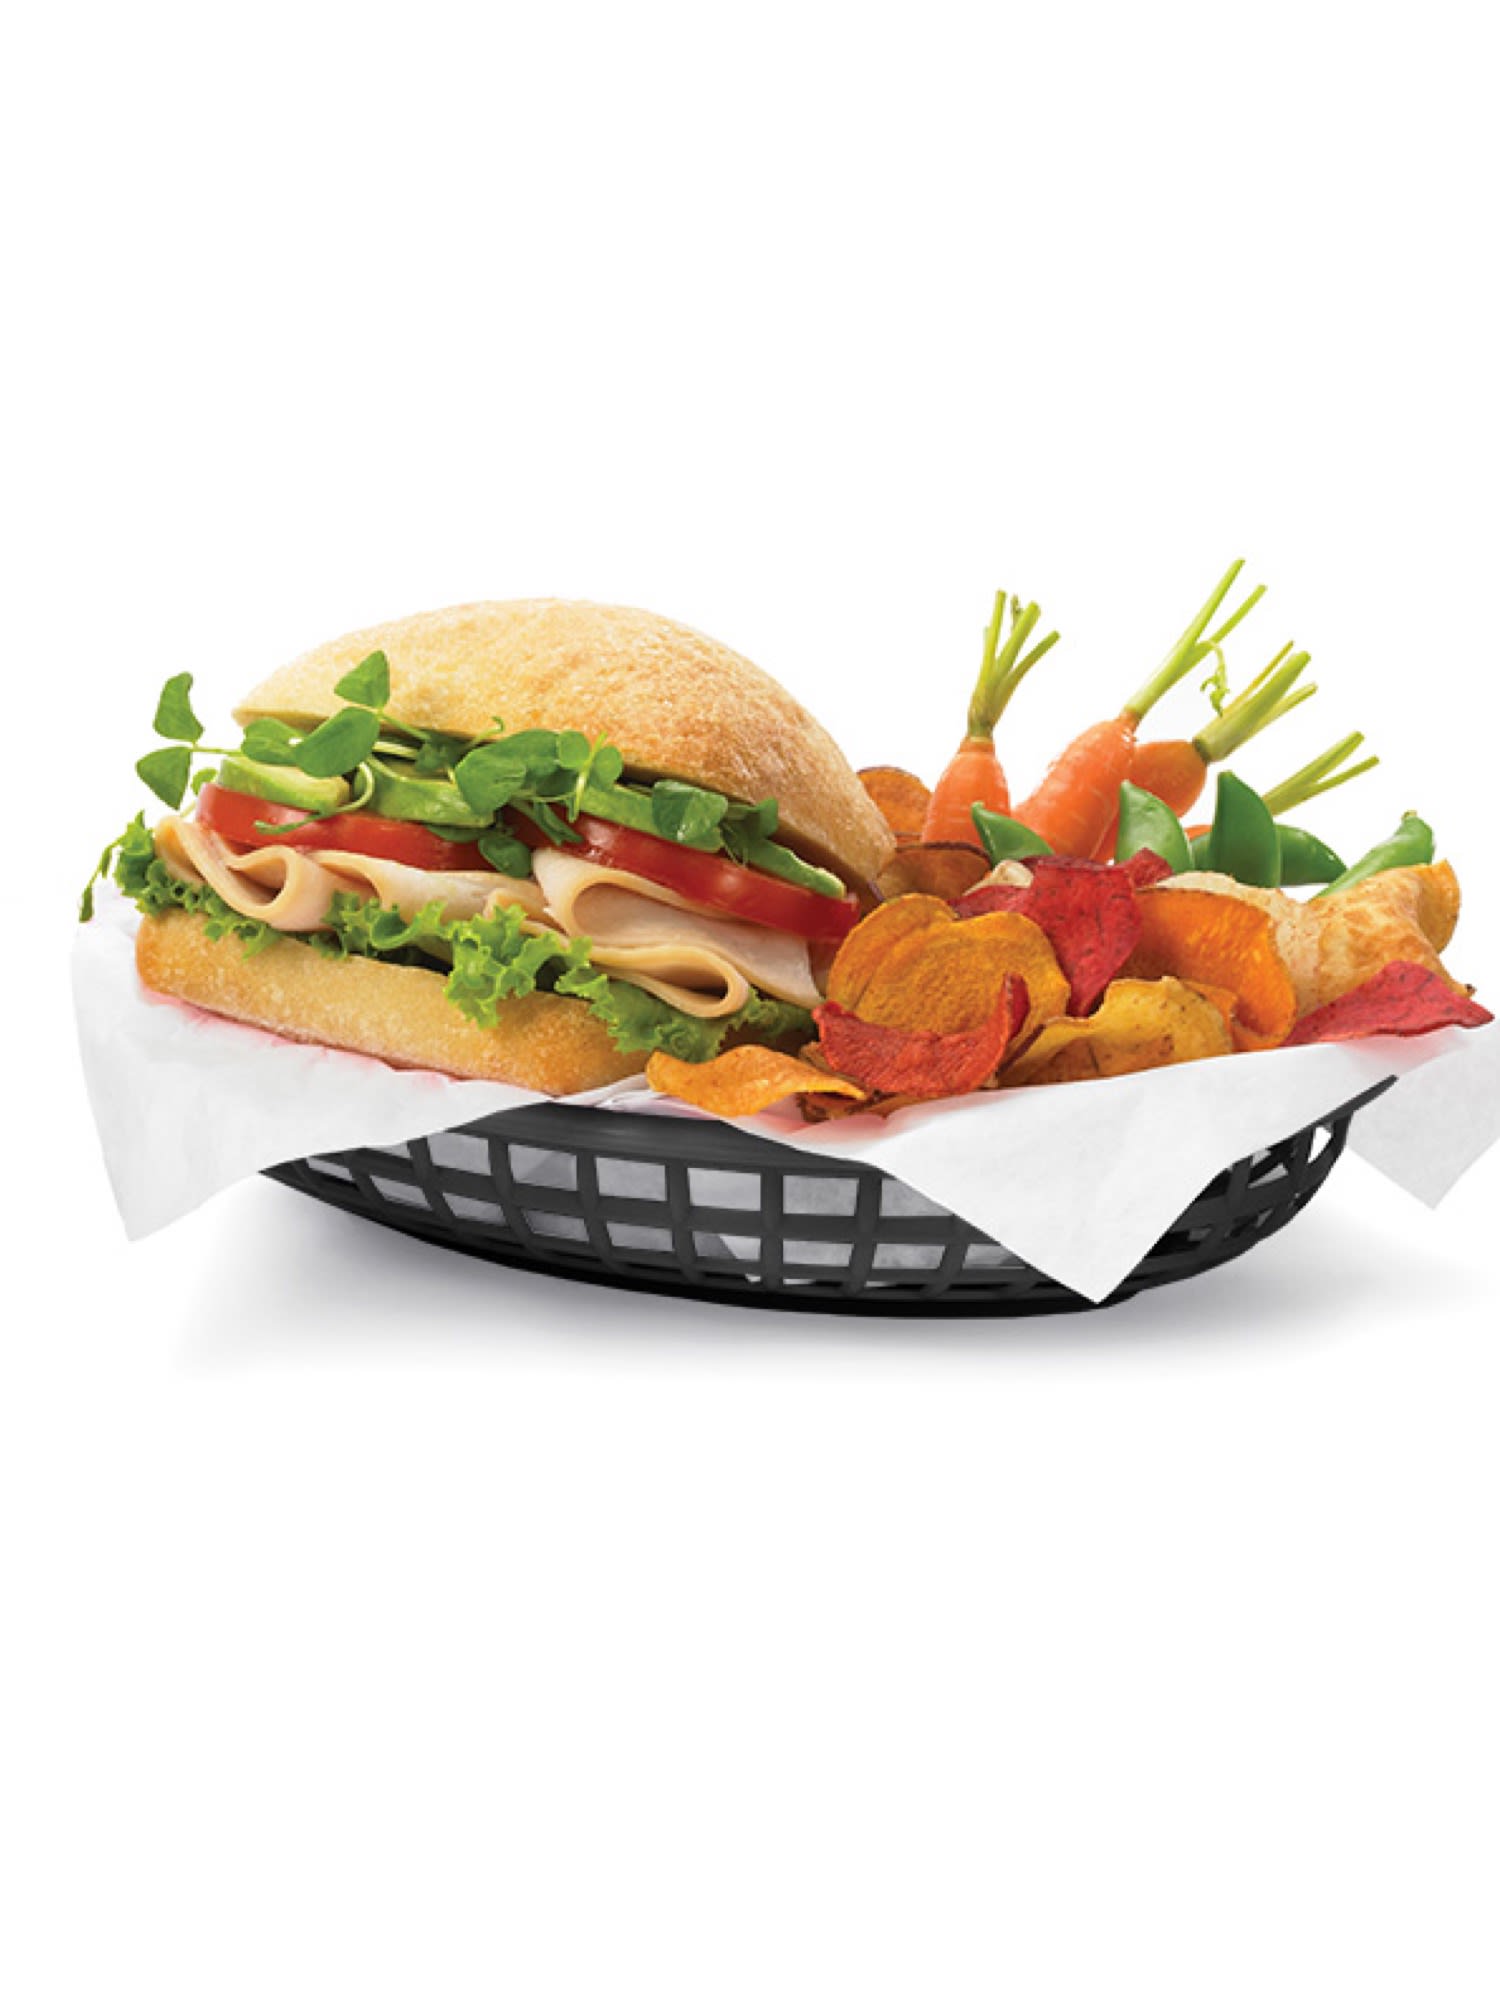 Create a relaxed and inviting atmosphere with these green fast food baskets at your restaurant.